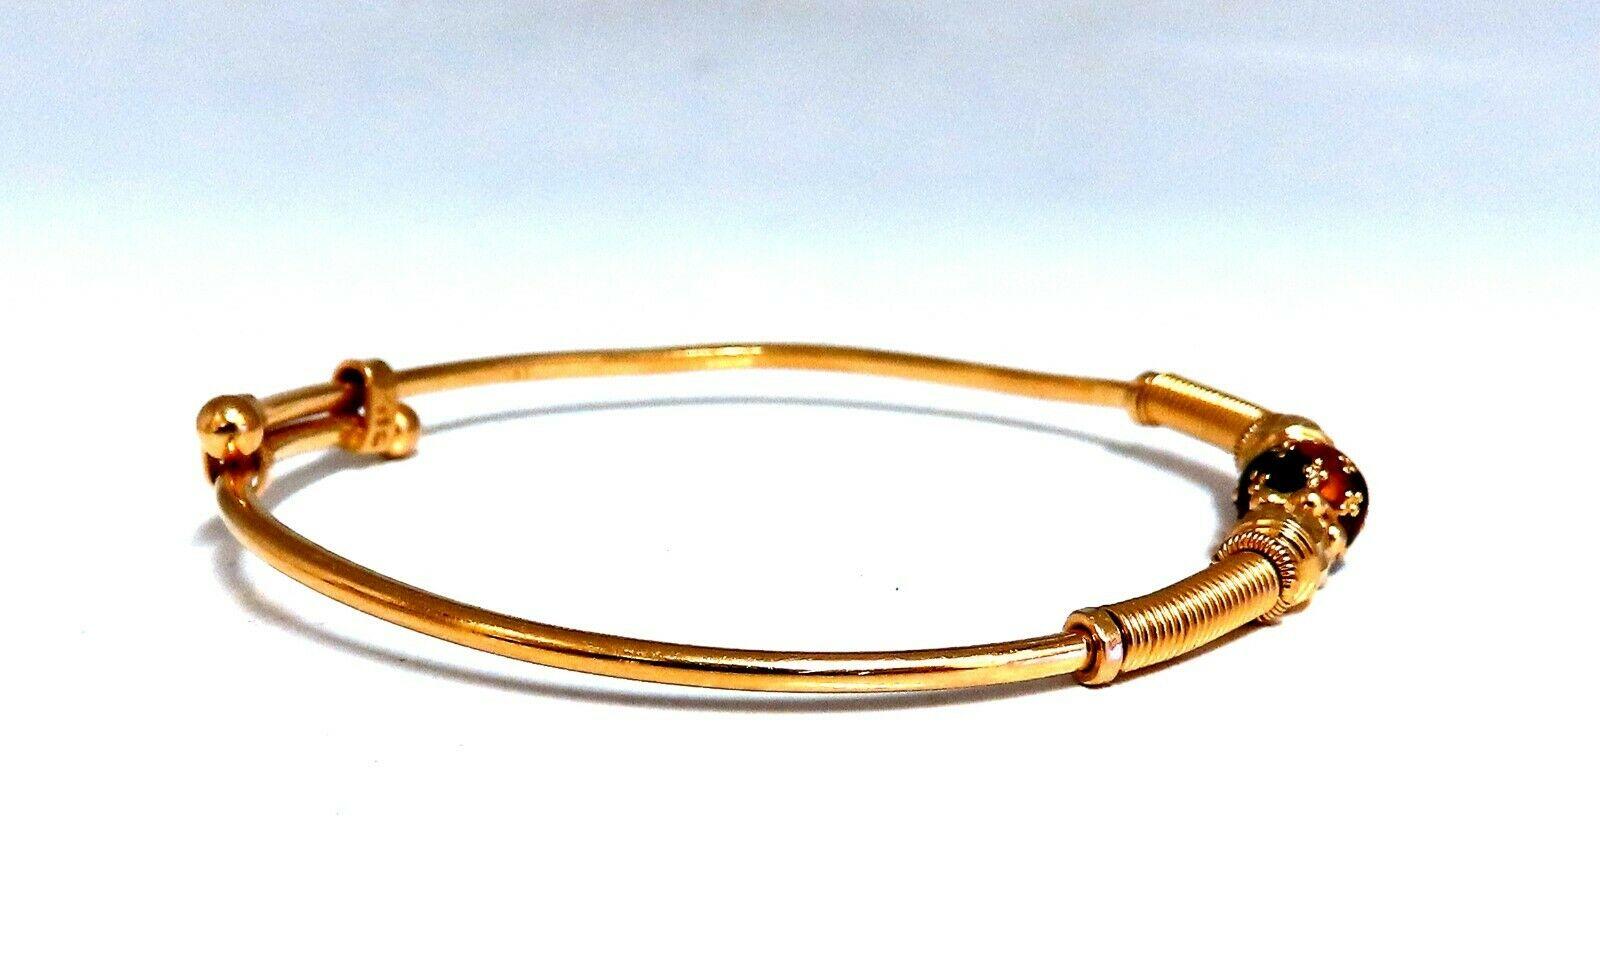 Twin Girl's Vintage Bangle Bracelet

Tested, 18kt gold.

Intricate details

For 4-5 inch wrist.

10.7 Grams.

2 x 1.9 inch

5.8mm circulating ball